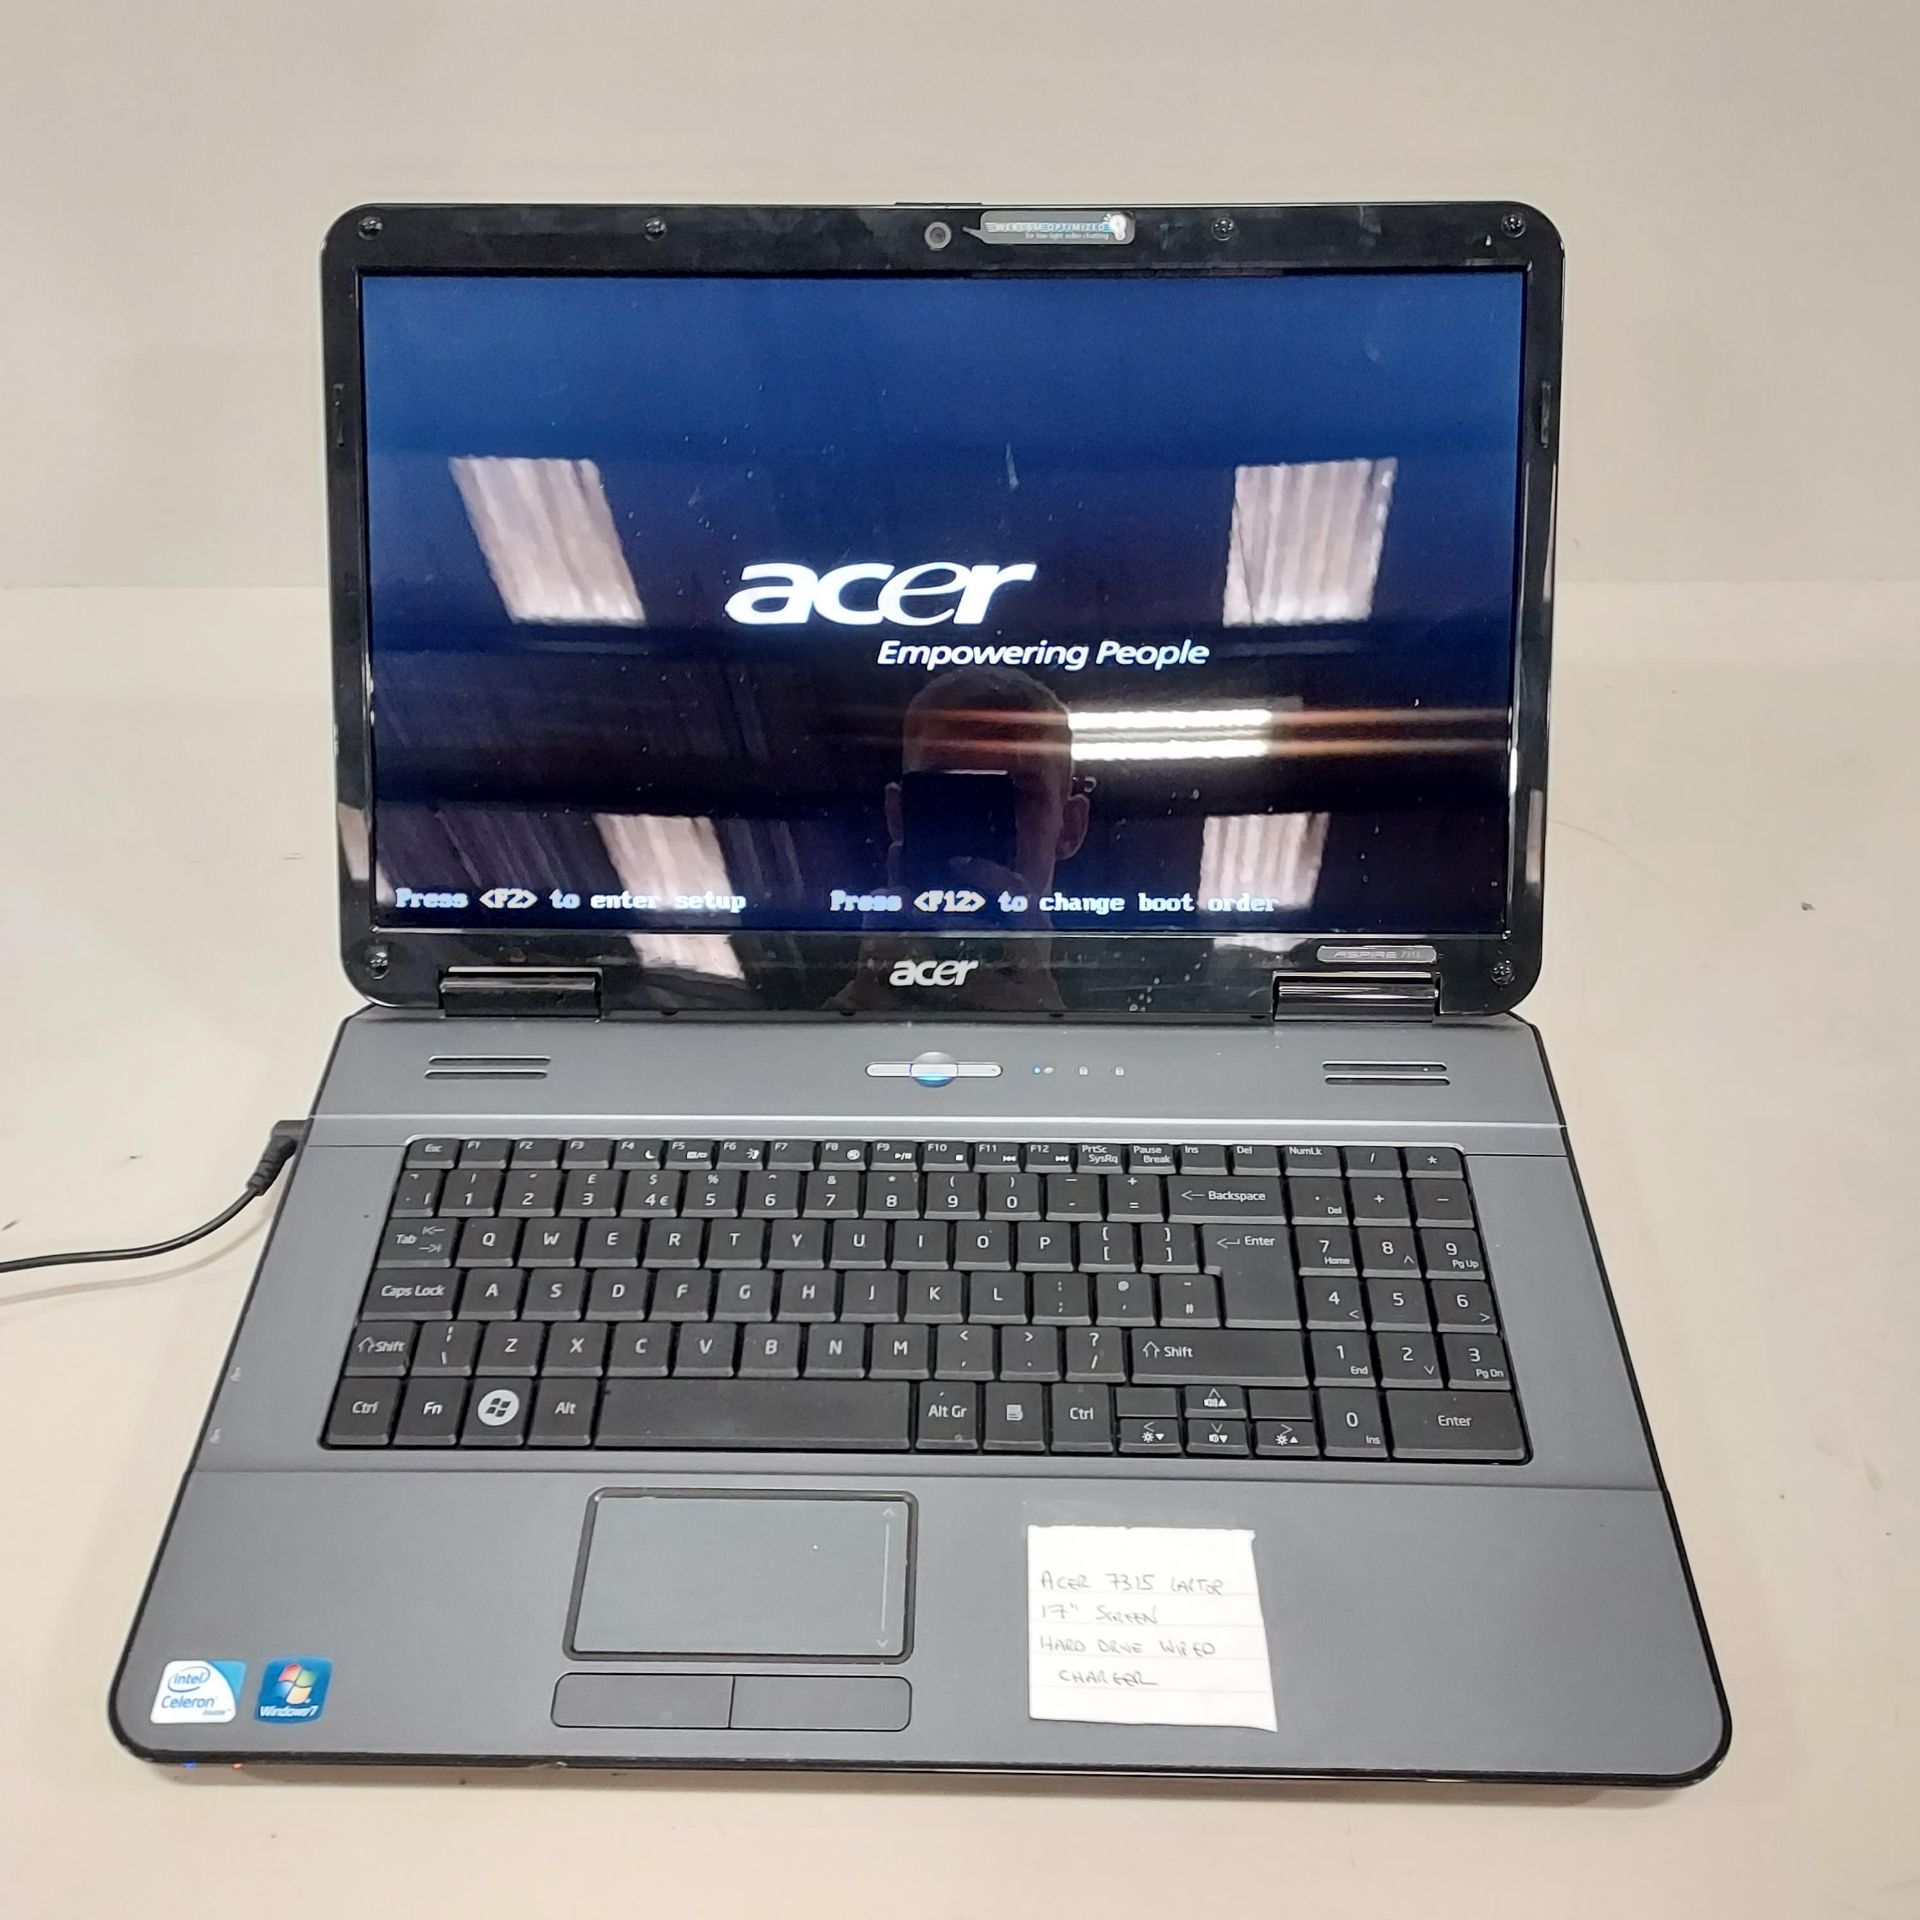 1 X ACER 7315 LAPTOP WITH 17 SCREEN - HARD DRIVE WIPED - NO OS - WITH CHARGER